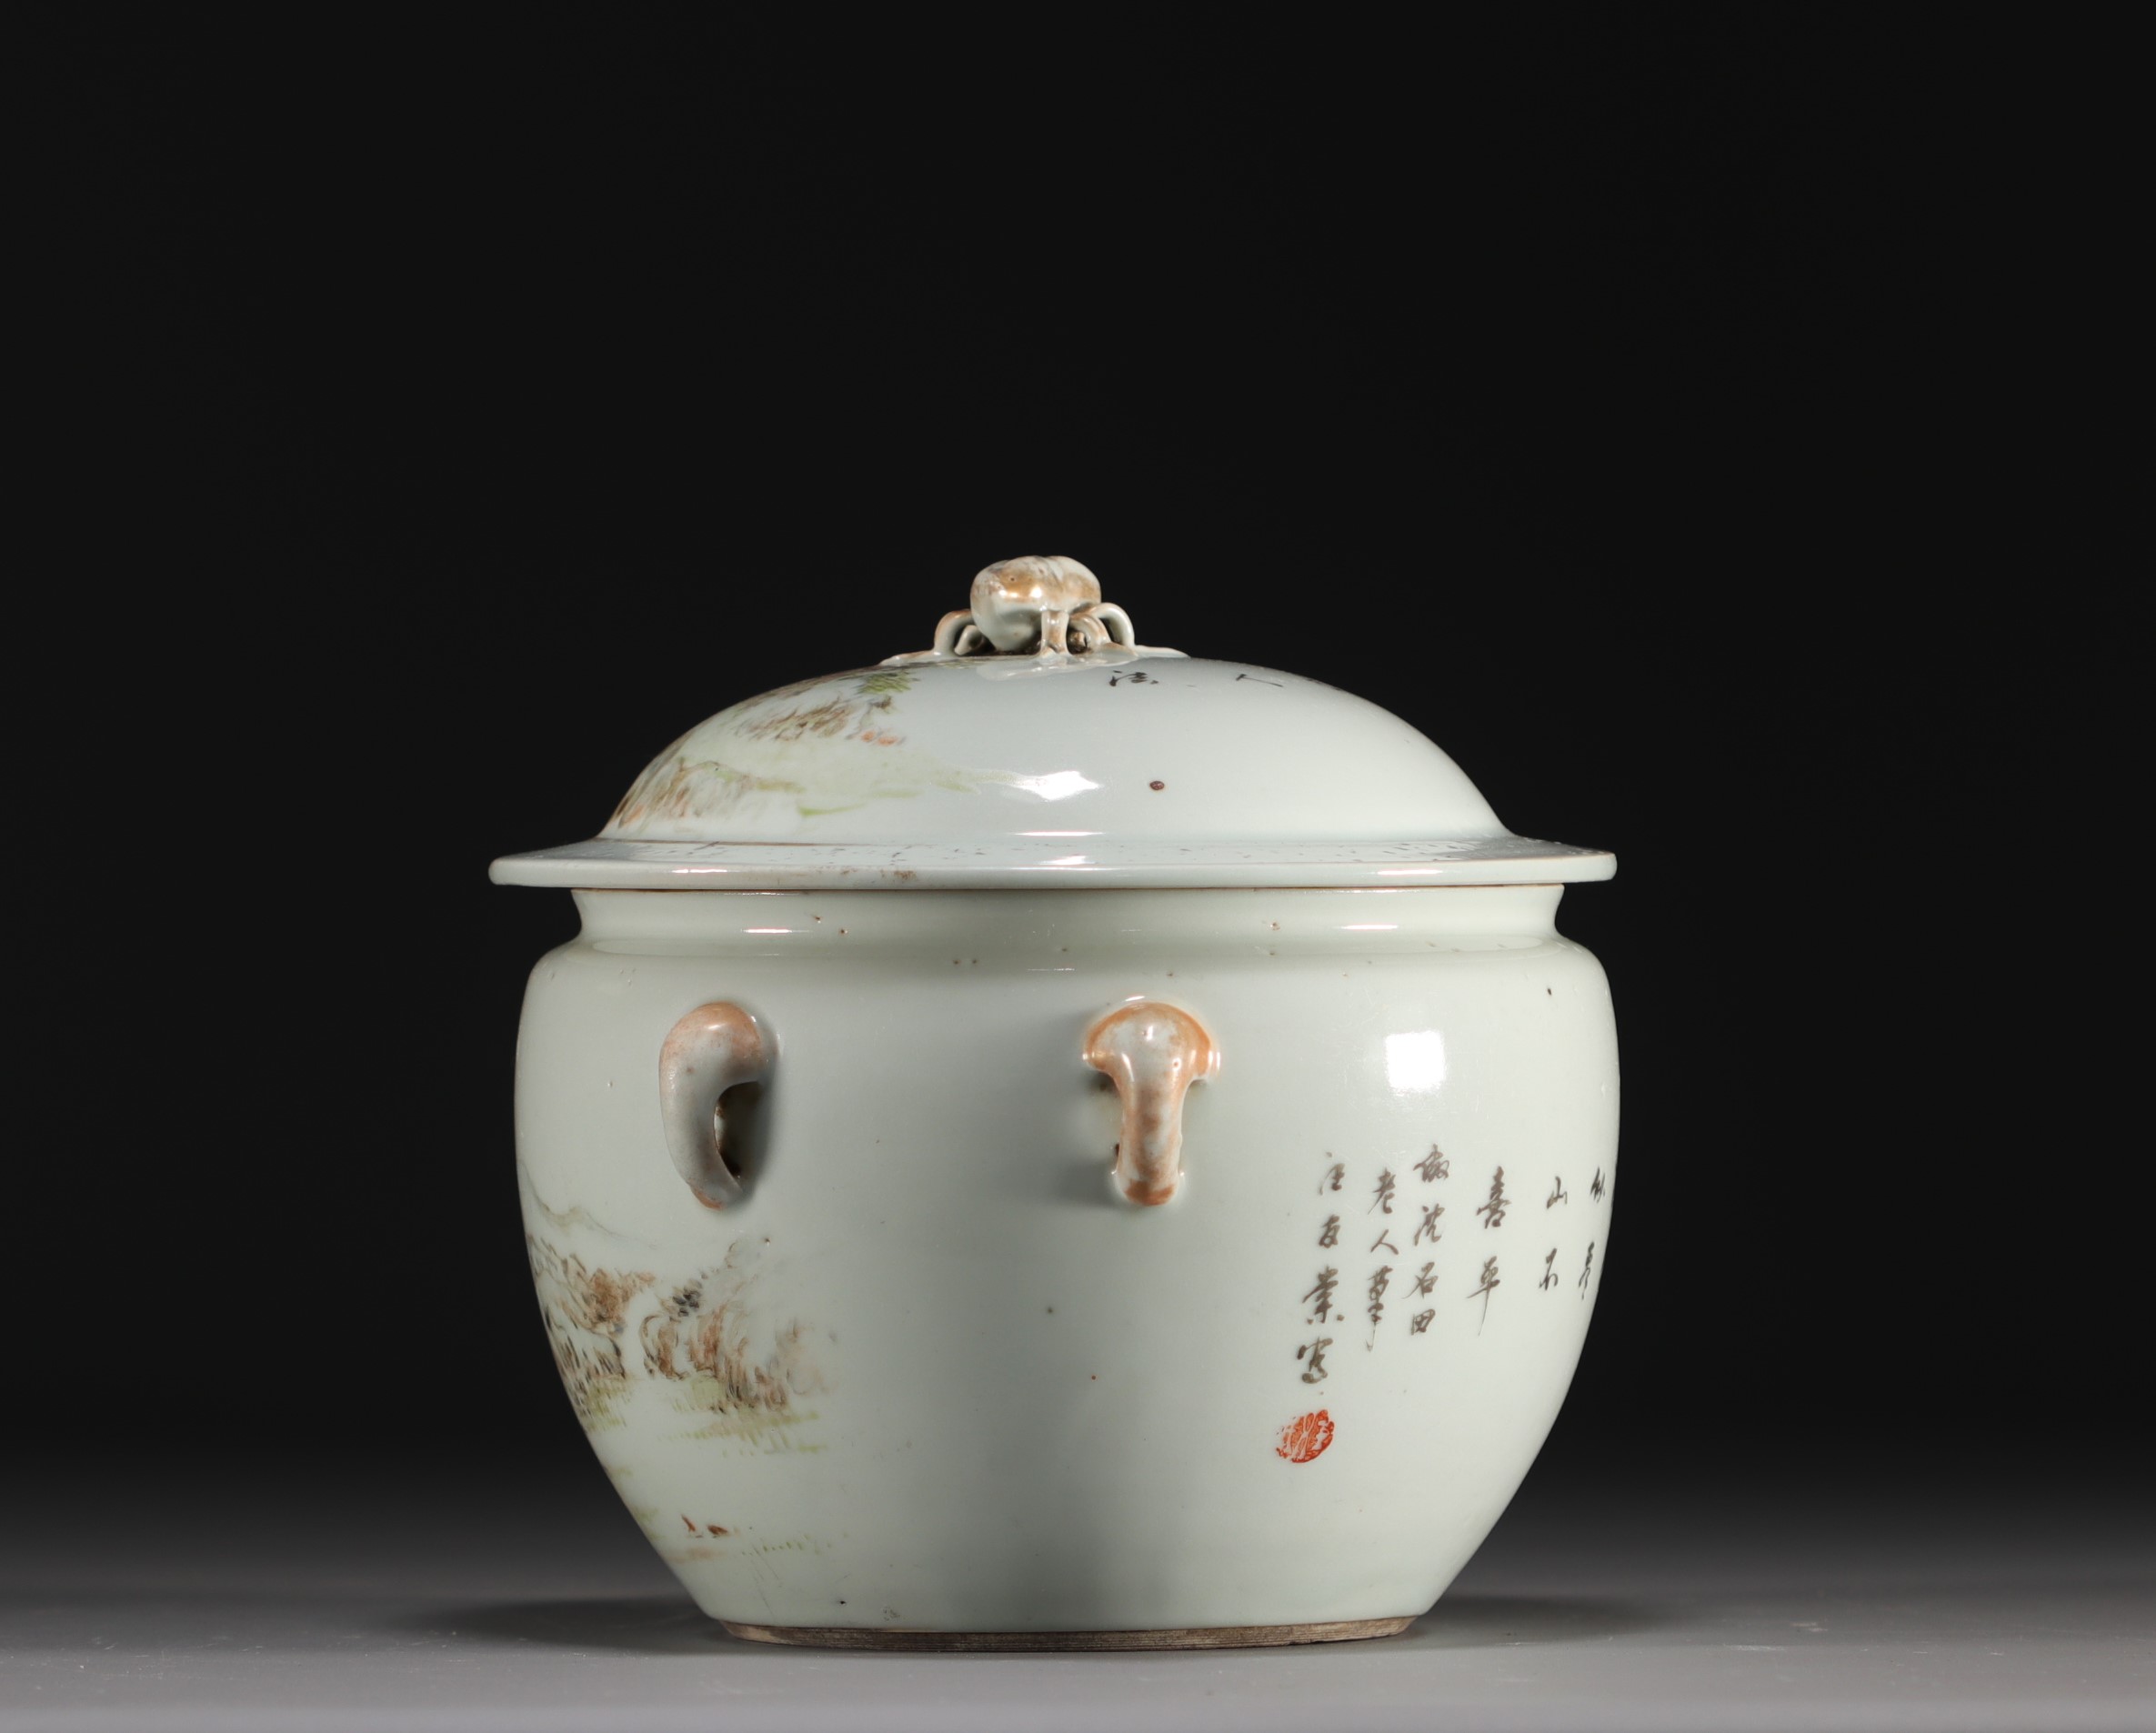 China - Tureen made of porcelain decorated with landscapes, 19th century. - Image 2 of 5